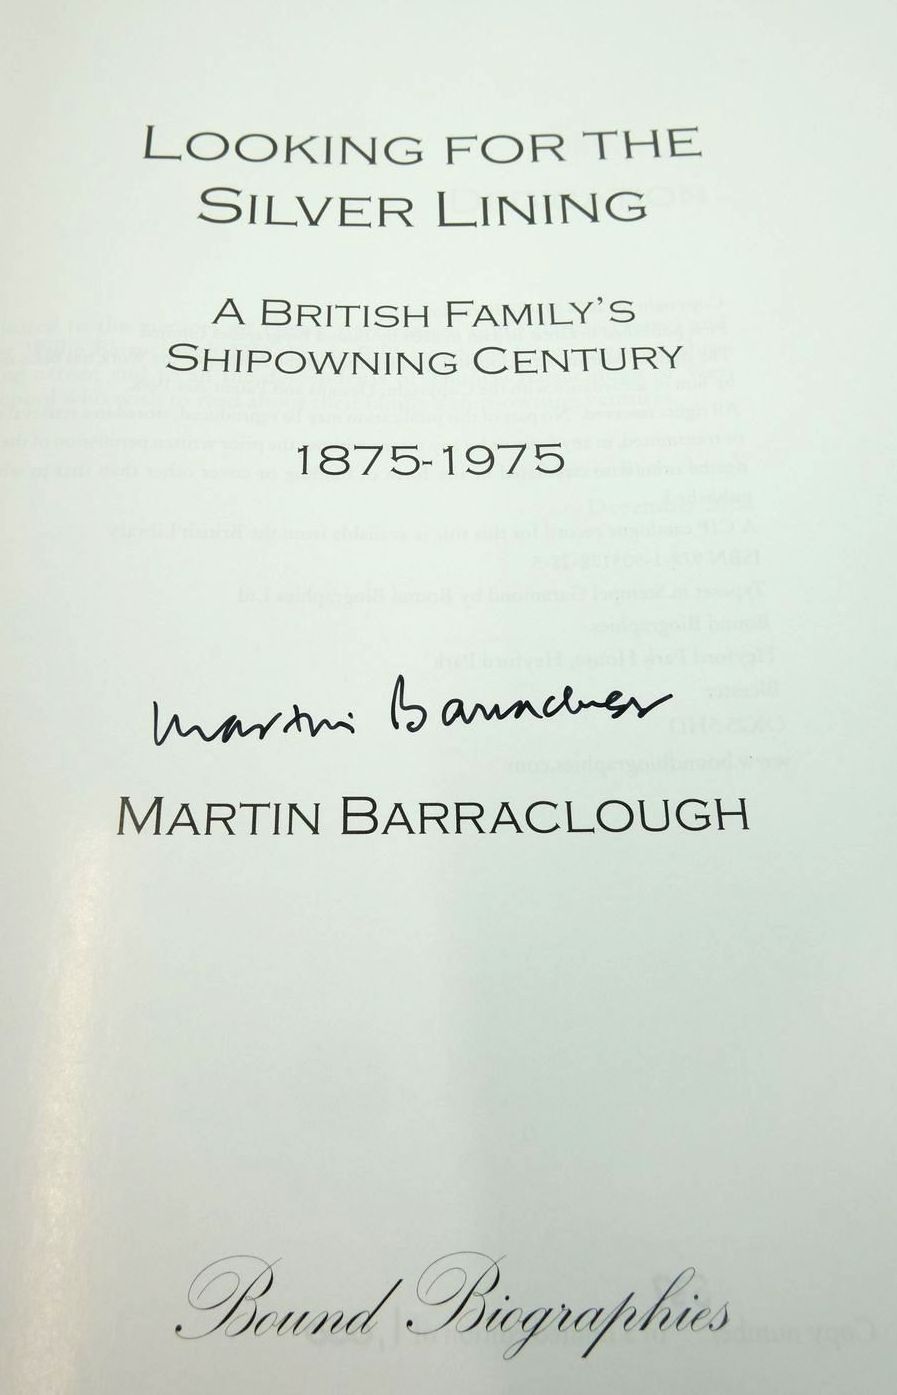 Photo of LOOKING FOR THE SILVER LINING: A BRITISH FAMILY'S SHIPOWNING CENTURY 1875-1975 written by Barraclough, Martin published by Bound Biographies (STOCK CODE: 1823306)  for sale by Stella & Rose's Books